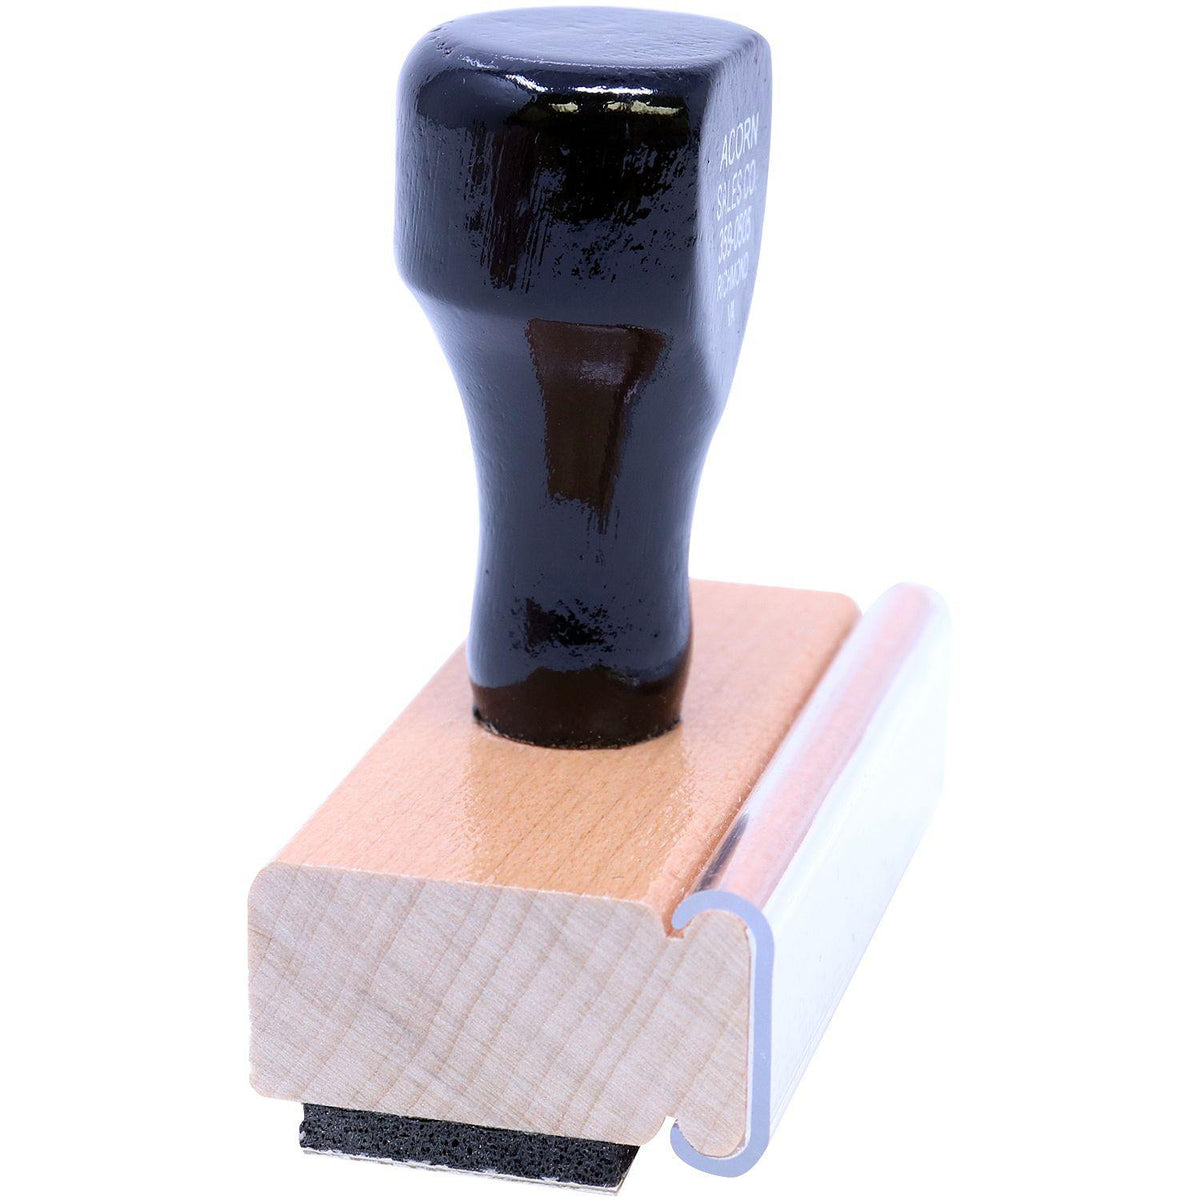 Side View of Great Improvement Rubber Stamp at an Angle